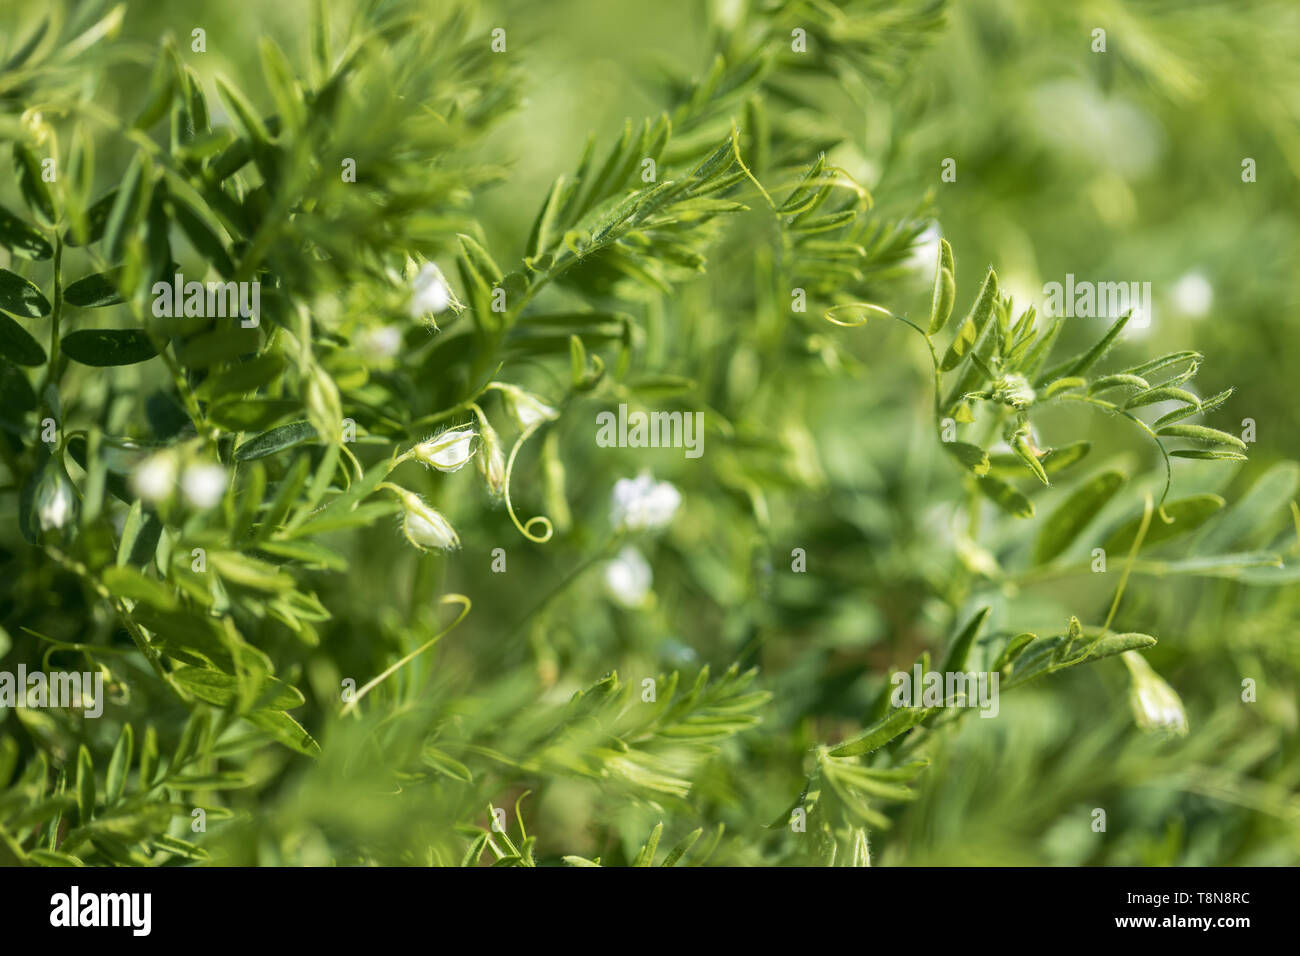 Close-up of lentil plant with white flowers. Lentil field. Detail of flowers and tendrils on a green background Stock Photo